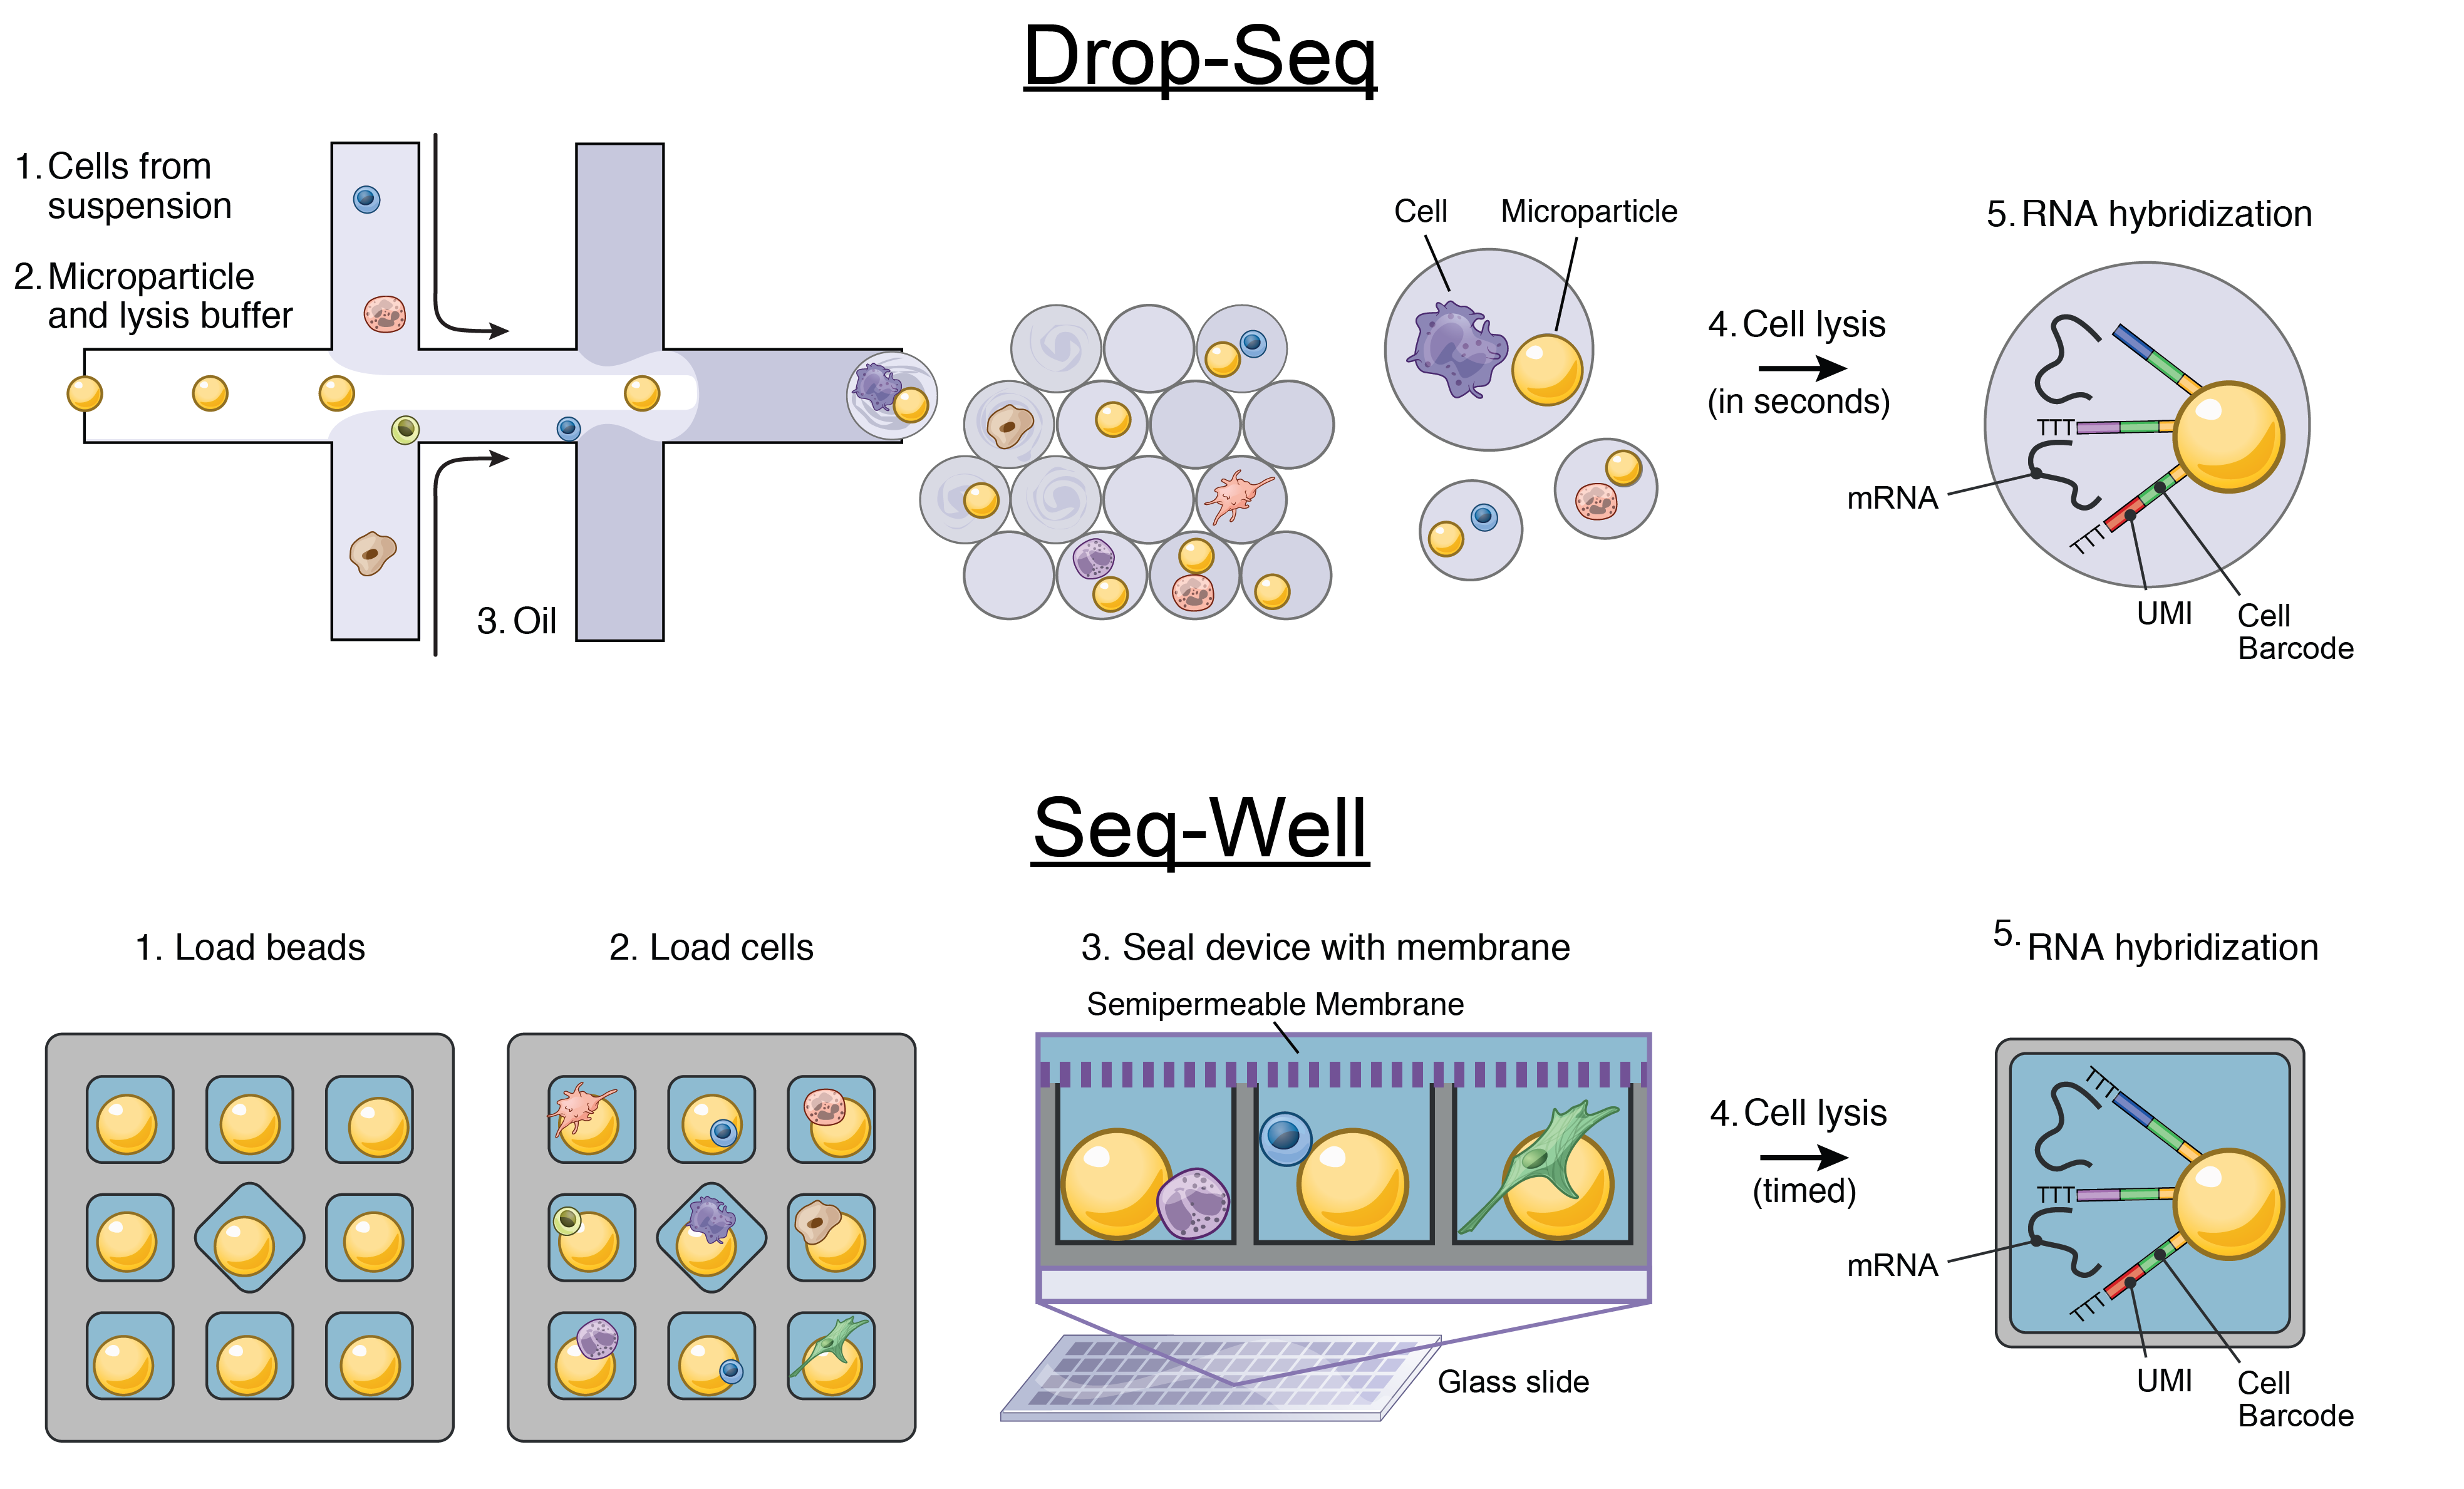 We have co-developed DropSeq and Seq-Well, two high-throughput technologies capable of profiling thousands of single cells.